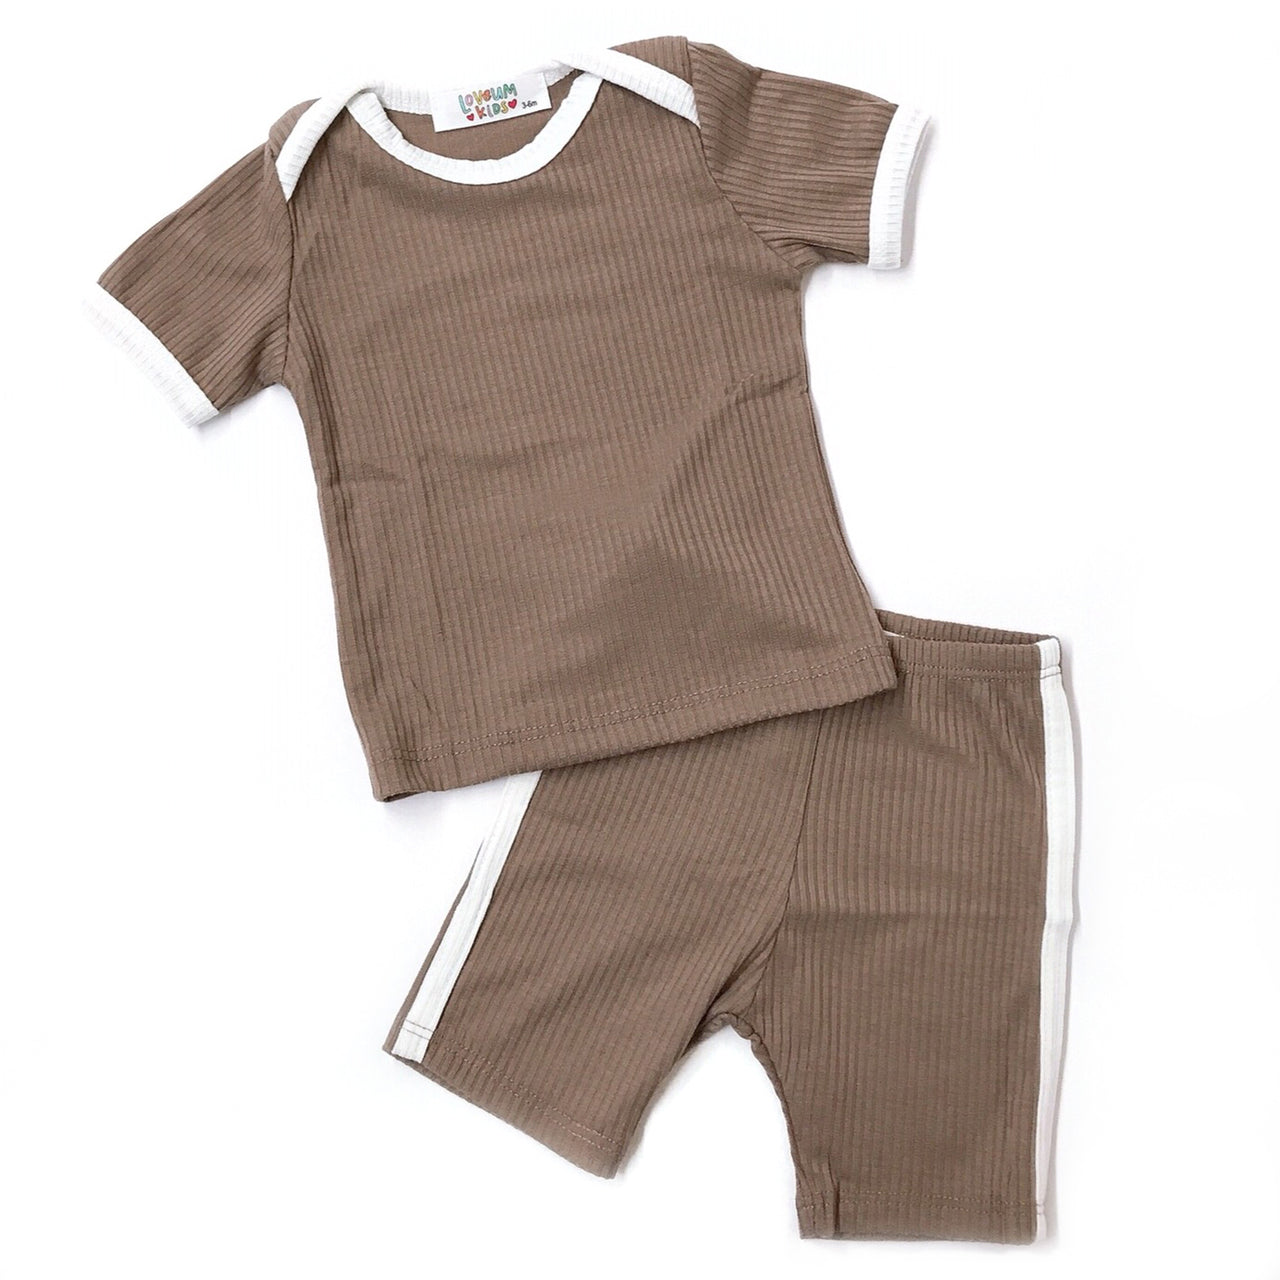 SpearmintLOVE’s baby Ribbed 2-Piece Outfit, Mocha